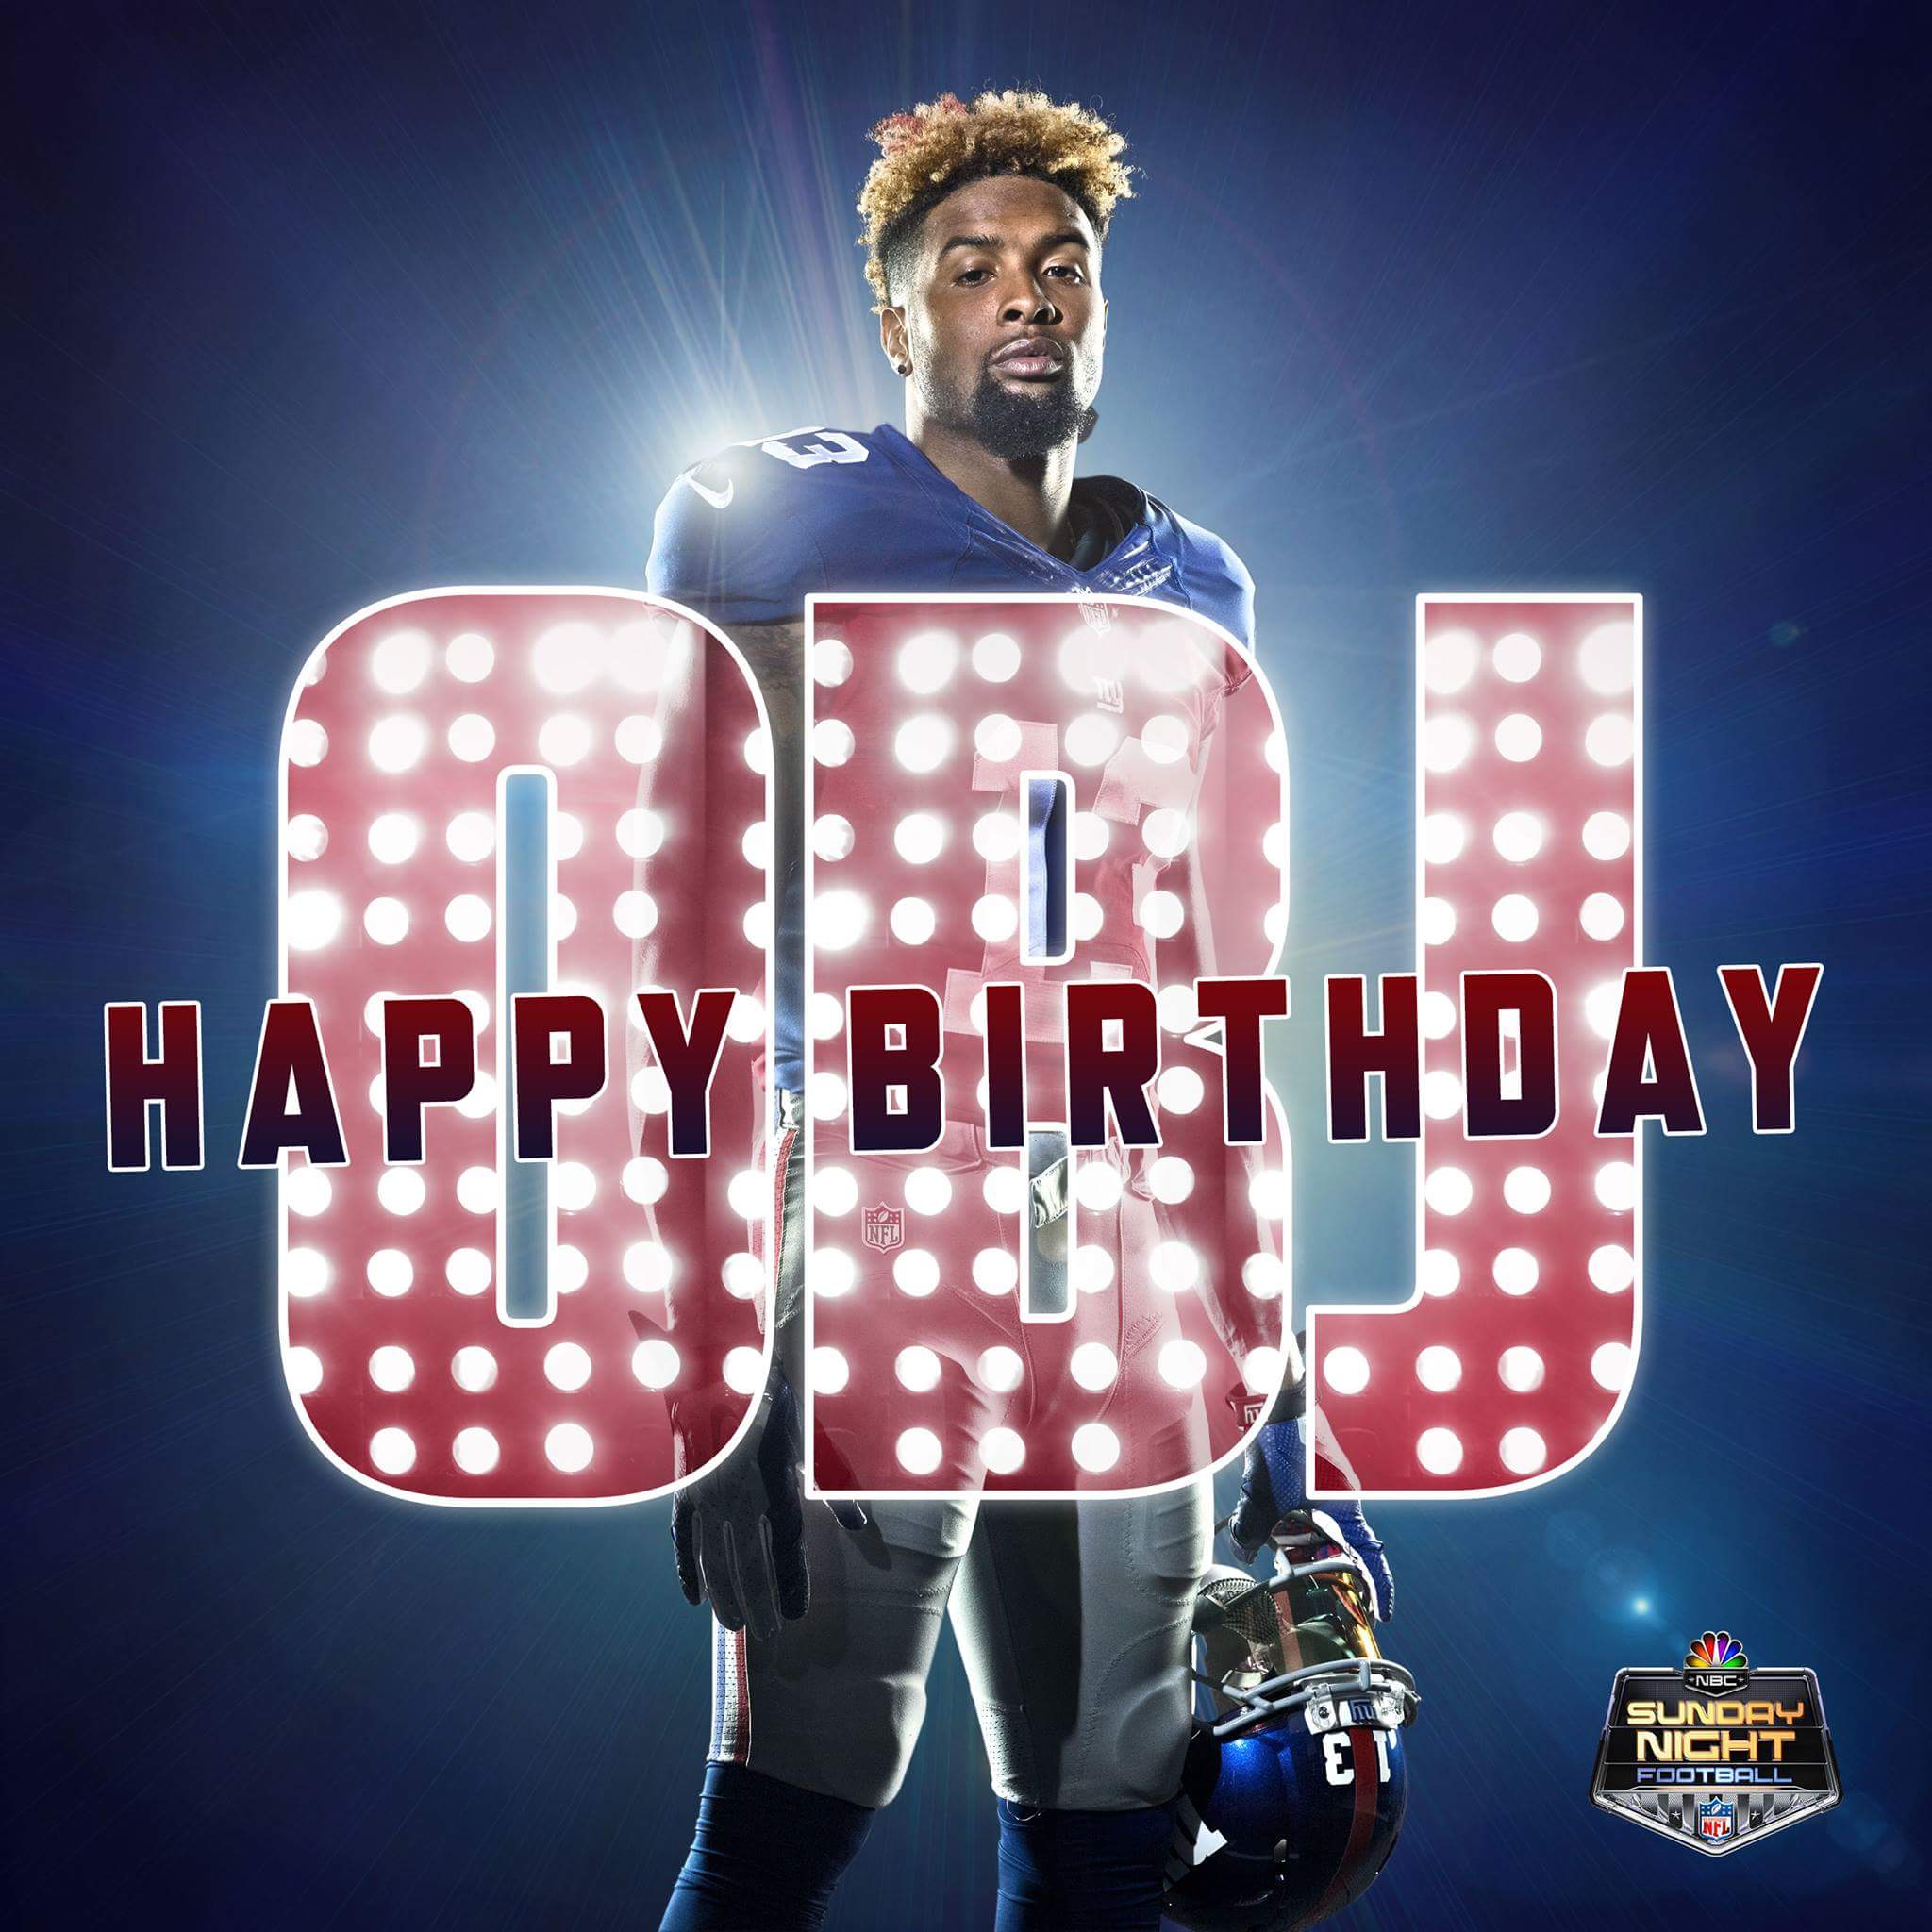 Happy birthday to New York Giants Wide Receiver Odell Beckham Jr! Get well soon!                    